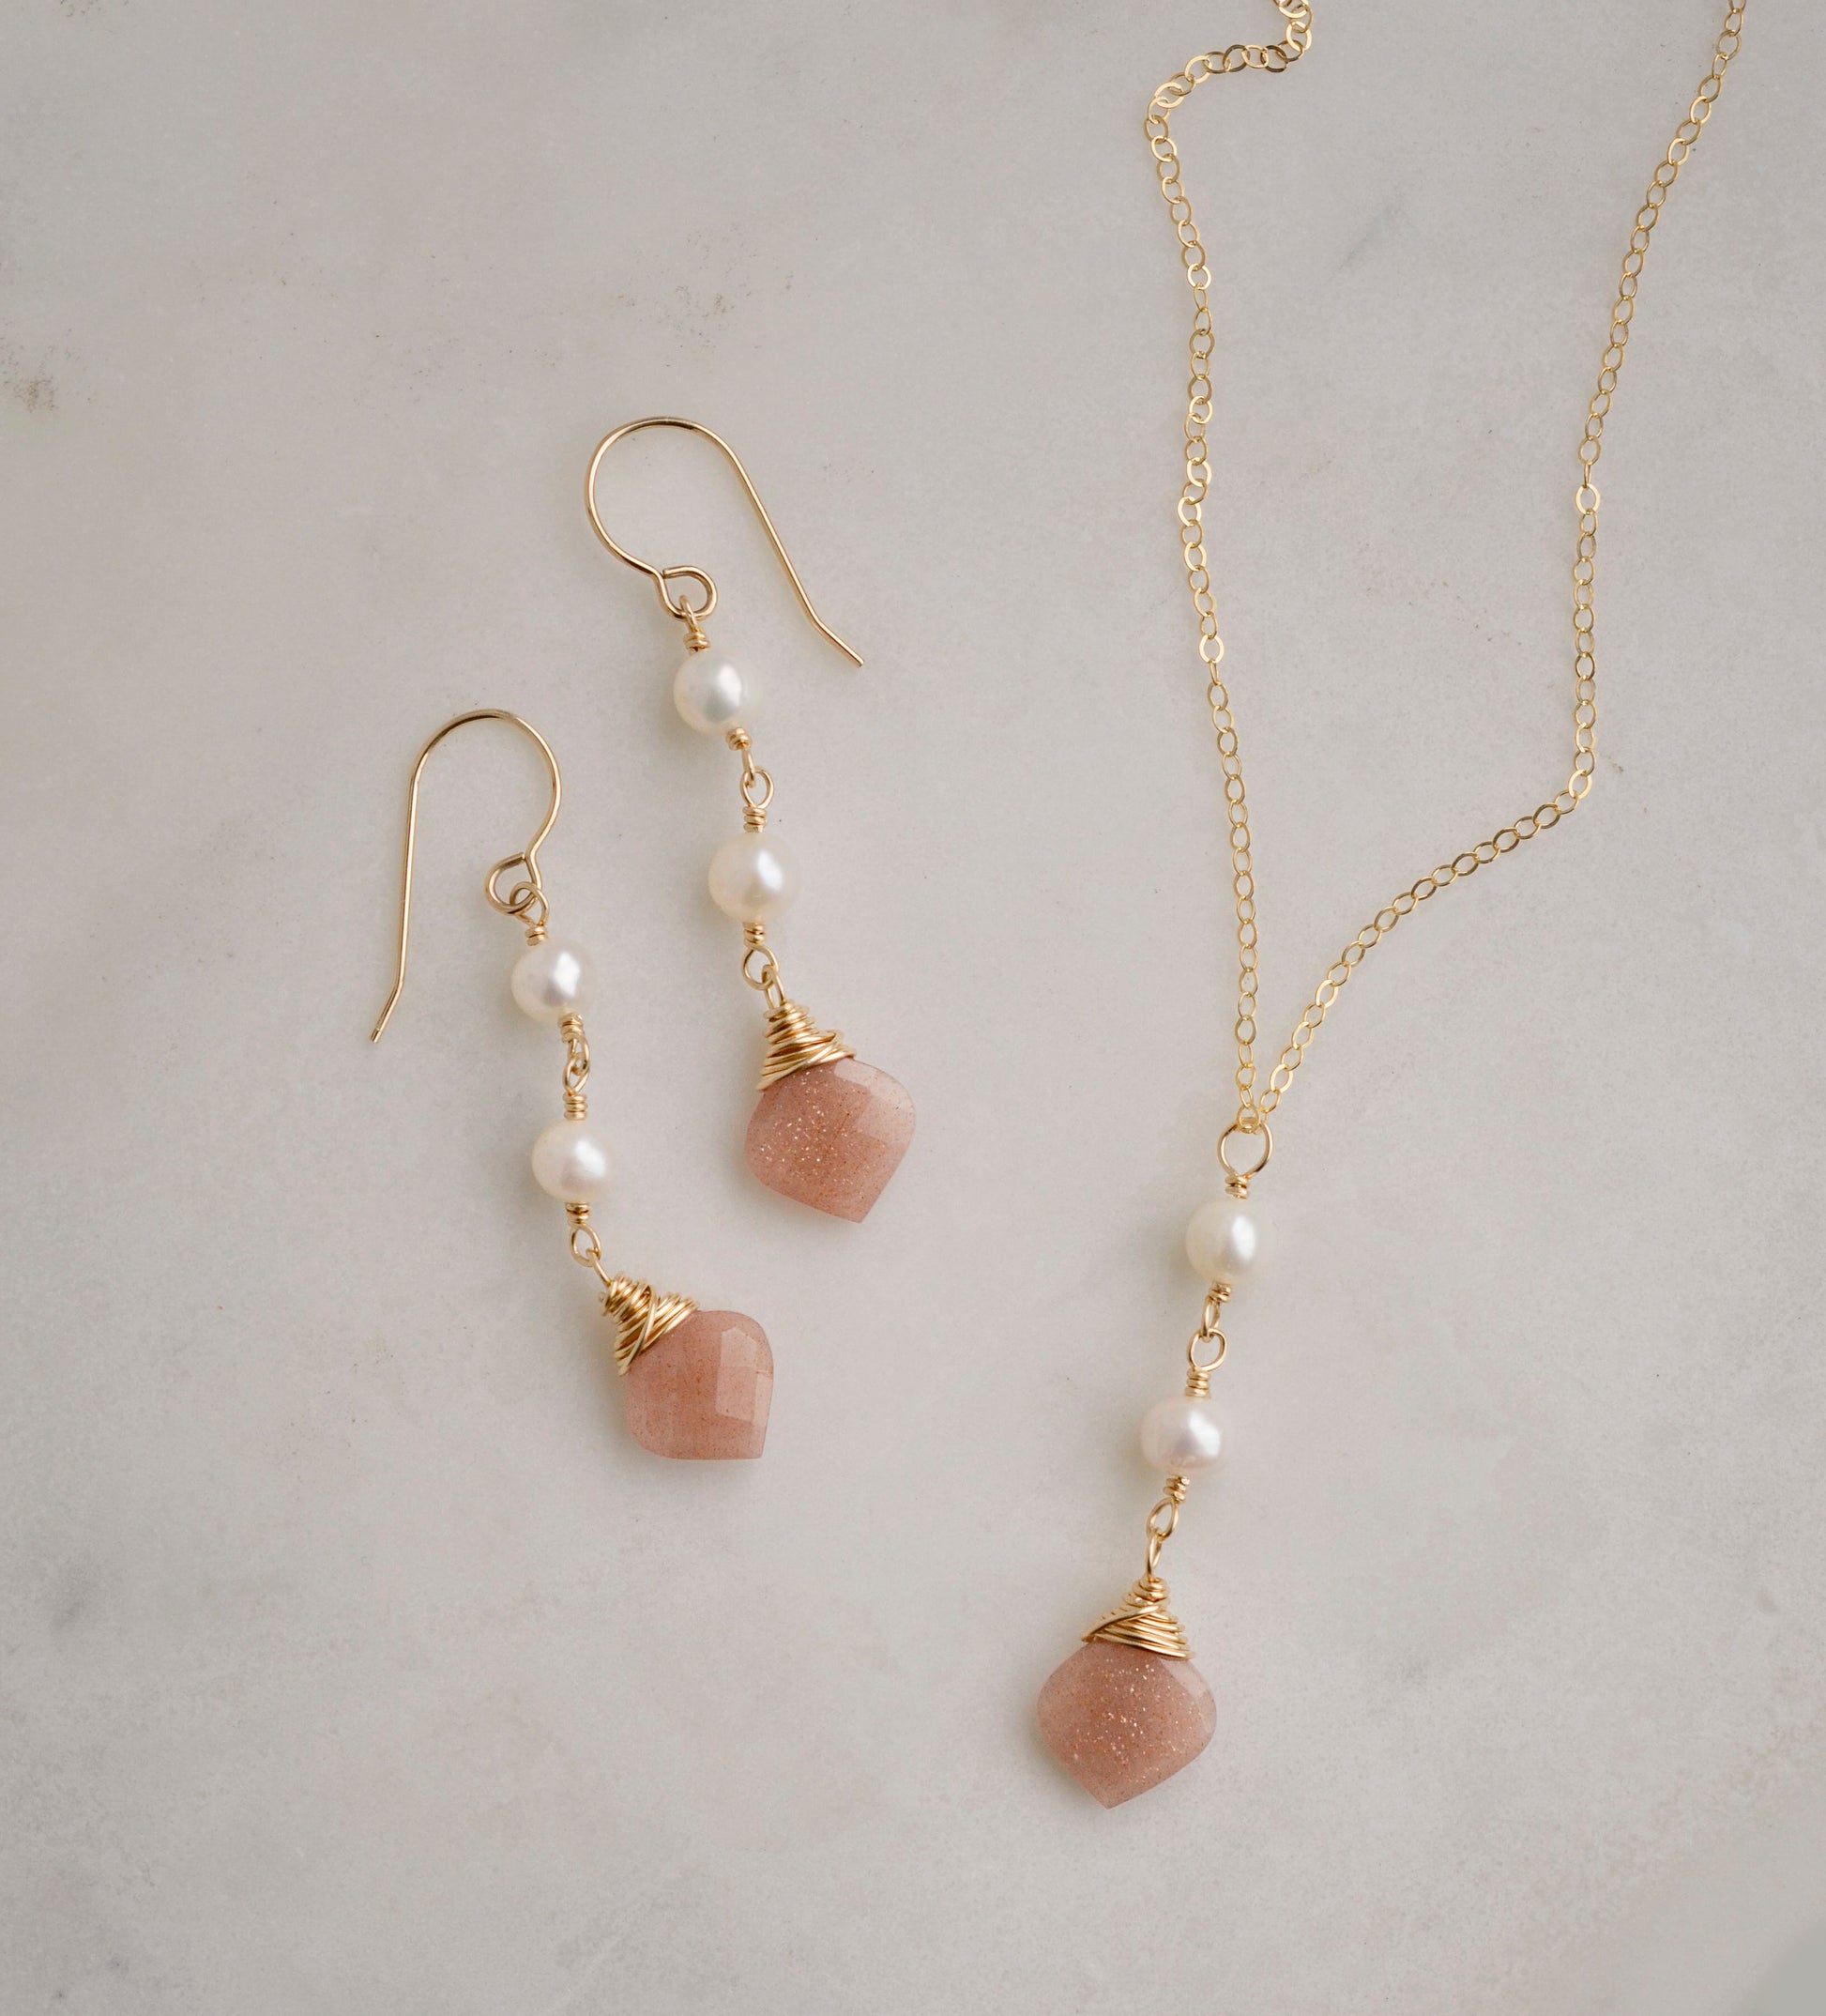 Two white semi-round pearls hang over a natural peach Moonstone faceted drop. The gold style pendant is shown with the matching earrings.